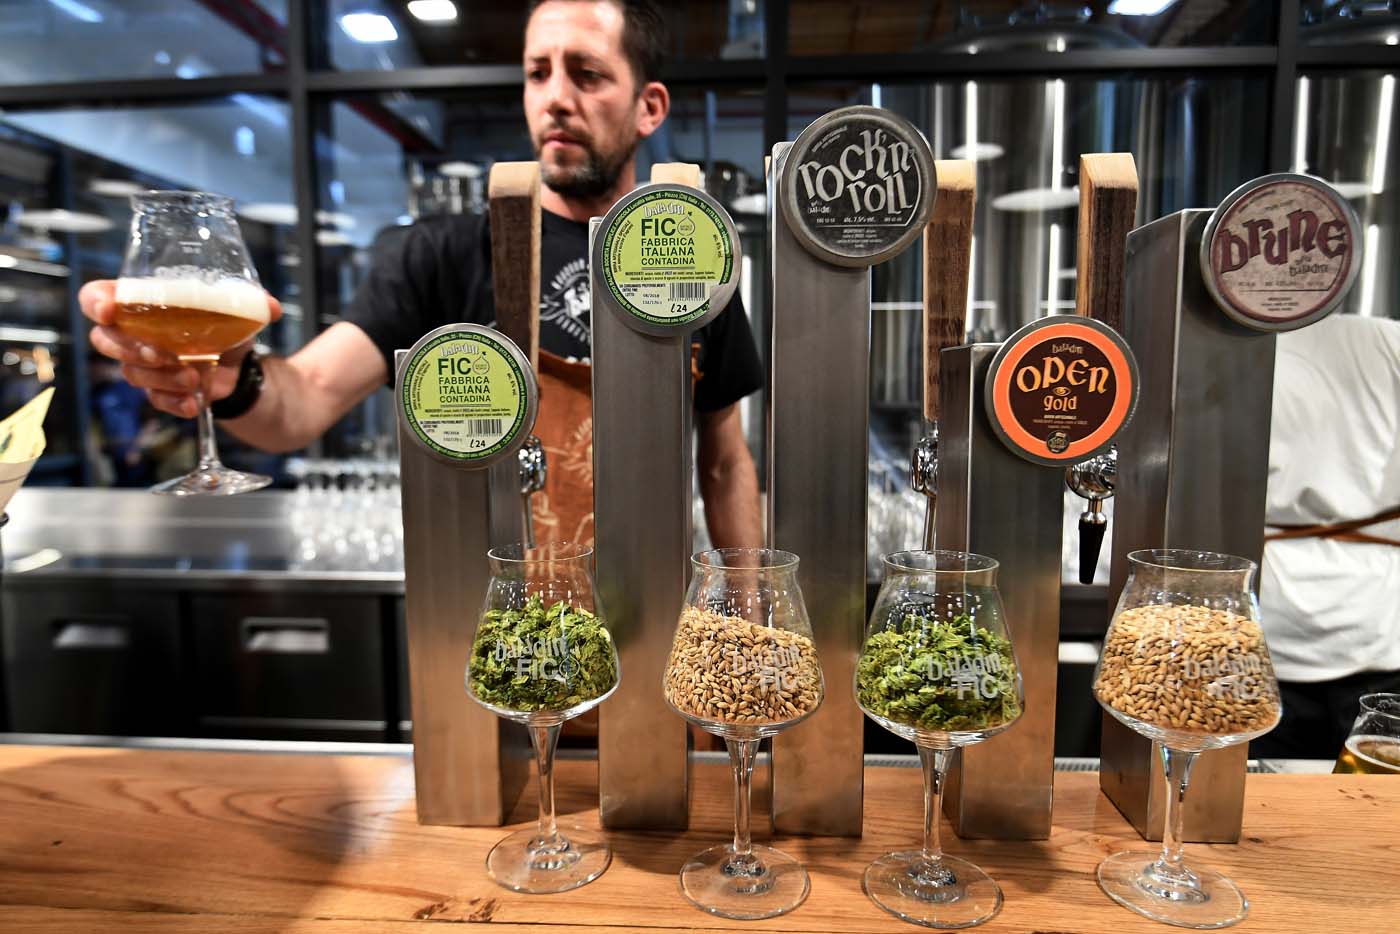 A man offers a glass of artisanal beer at a stand during a press tour at FICO Eataly World agri-food park in Bologna on November 9, 2017.  FICO Eataly World, said to be the world's biggest agri-food park, will open to the public on November 15, 2017. The free entry park, widely described as the Disney World of Italian food, is ten hectares big and will enshrine all the Italian food biodiversity.  / AFP PHOTO / Vincenzo PINTO